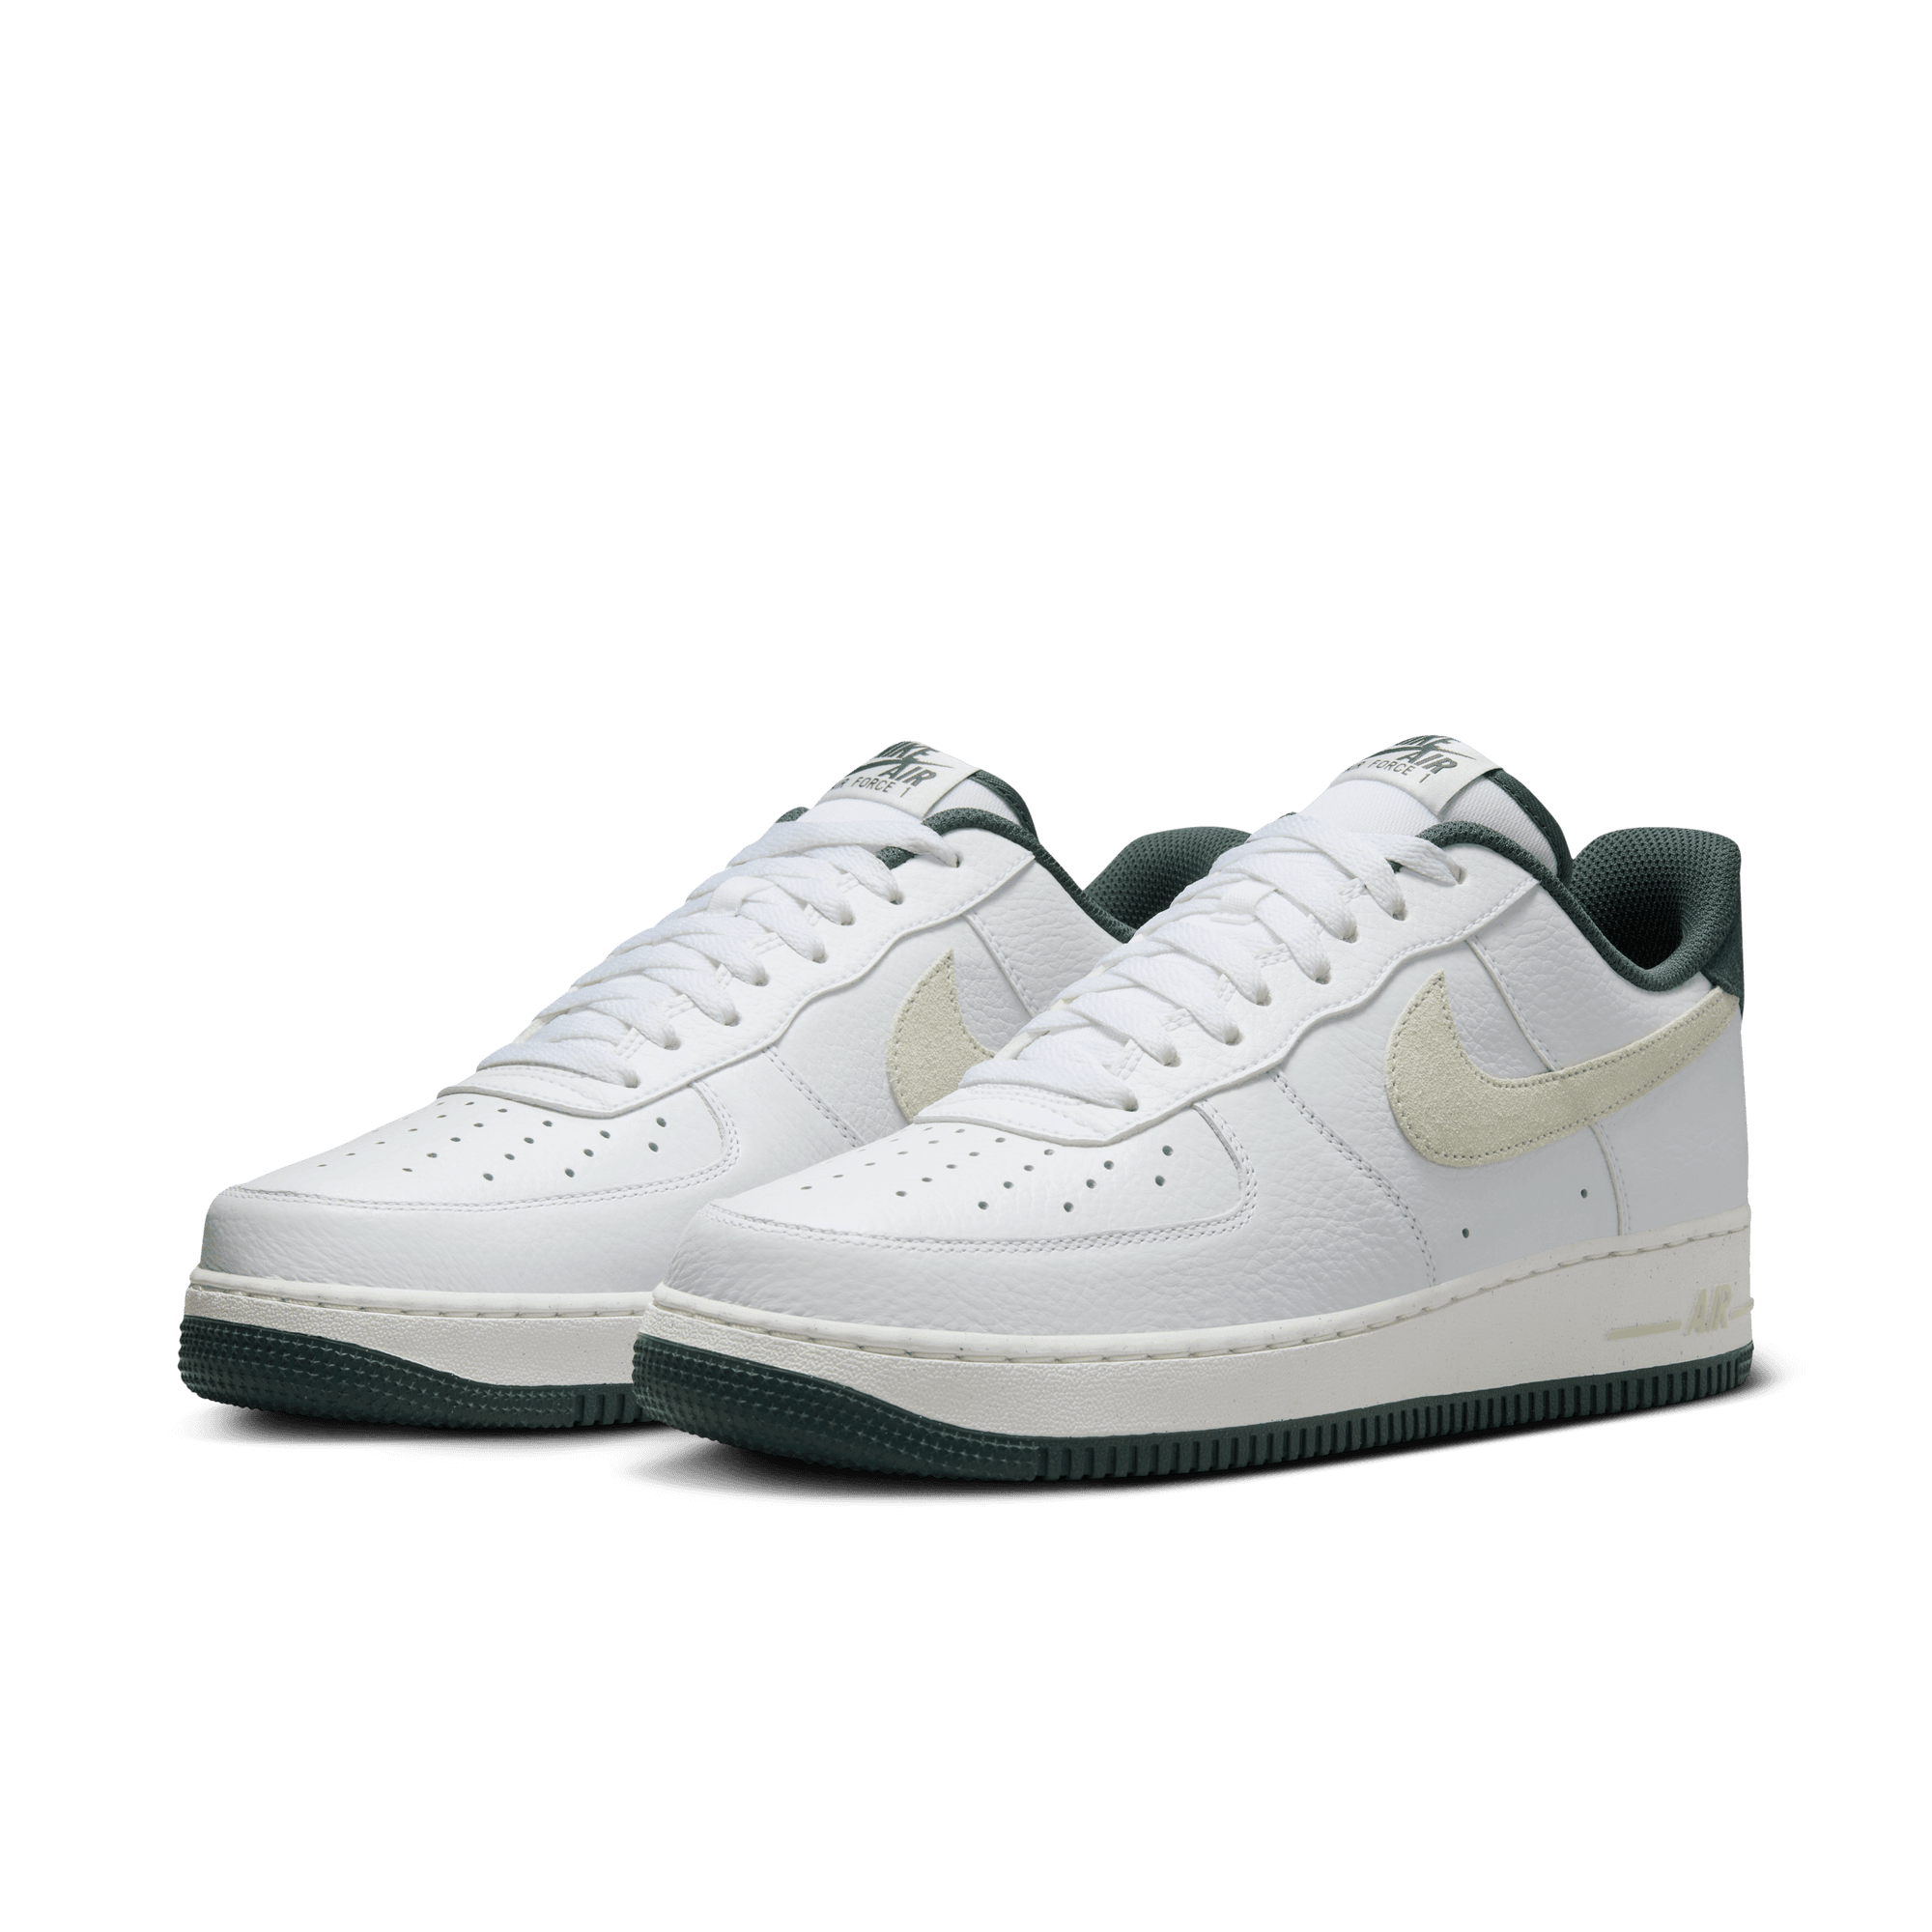 NIKE AIR FORCE 1 '07 LV8 MEN'S SHOES